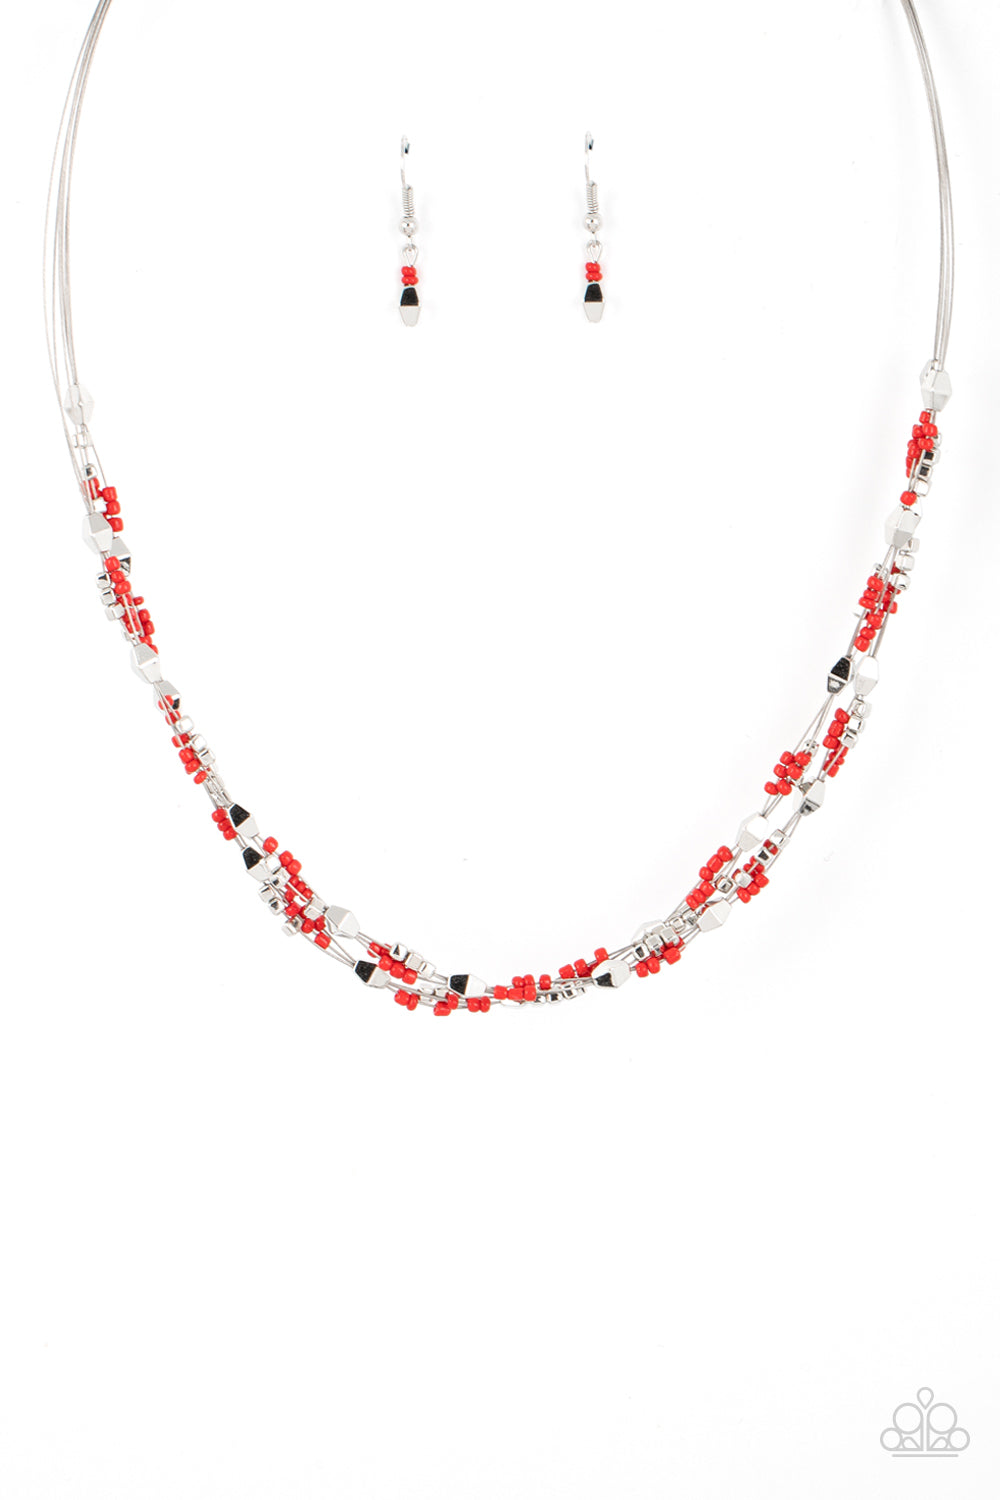 Paparazzi Necklaces - Explore Every Angle - Red